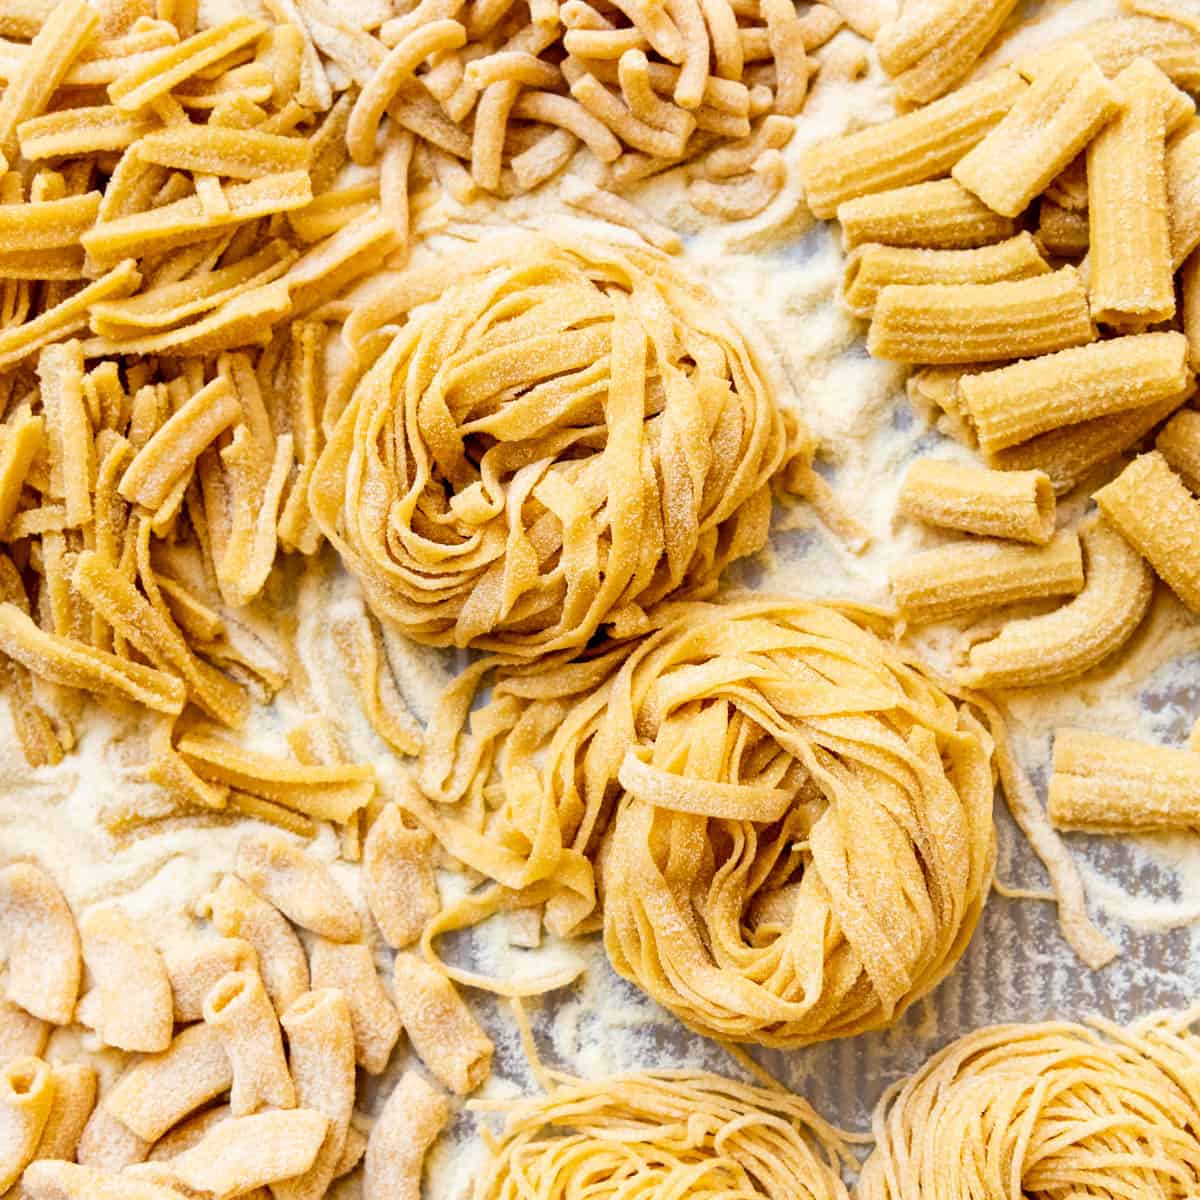 5 Of The Best Noodle/Pasta Makers To Prepare Fresh Noodles At Home